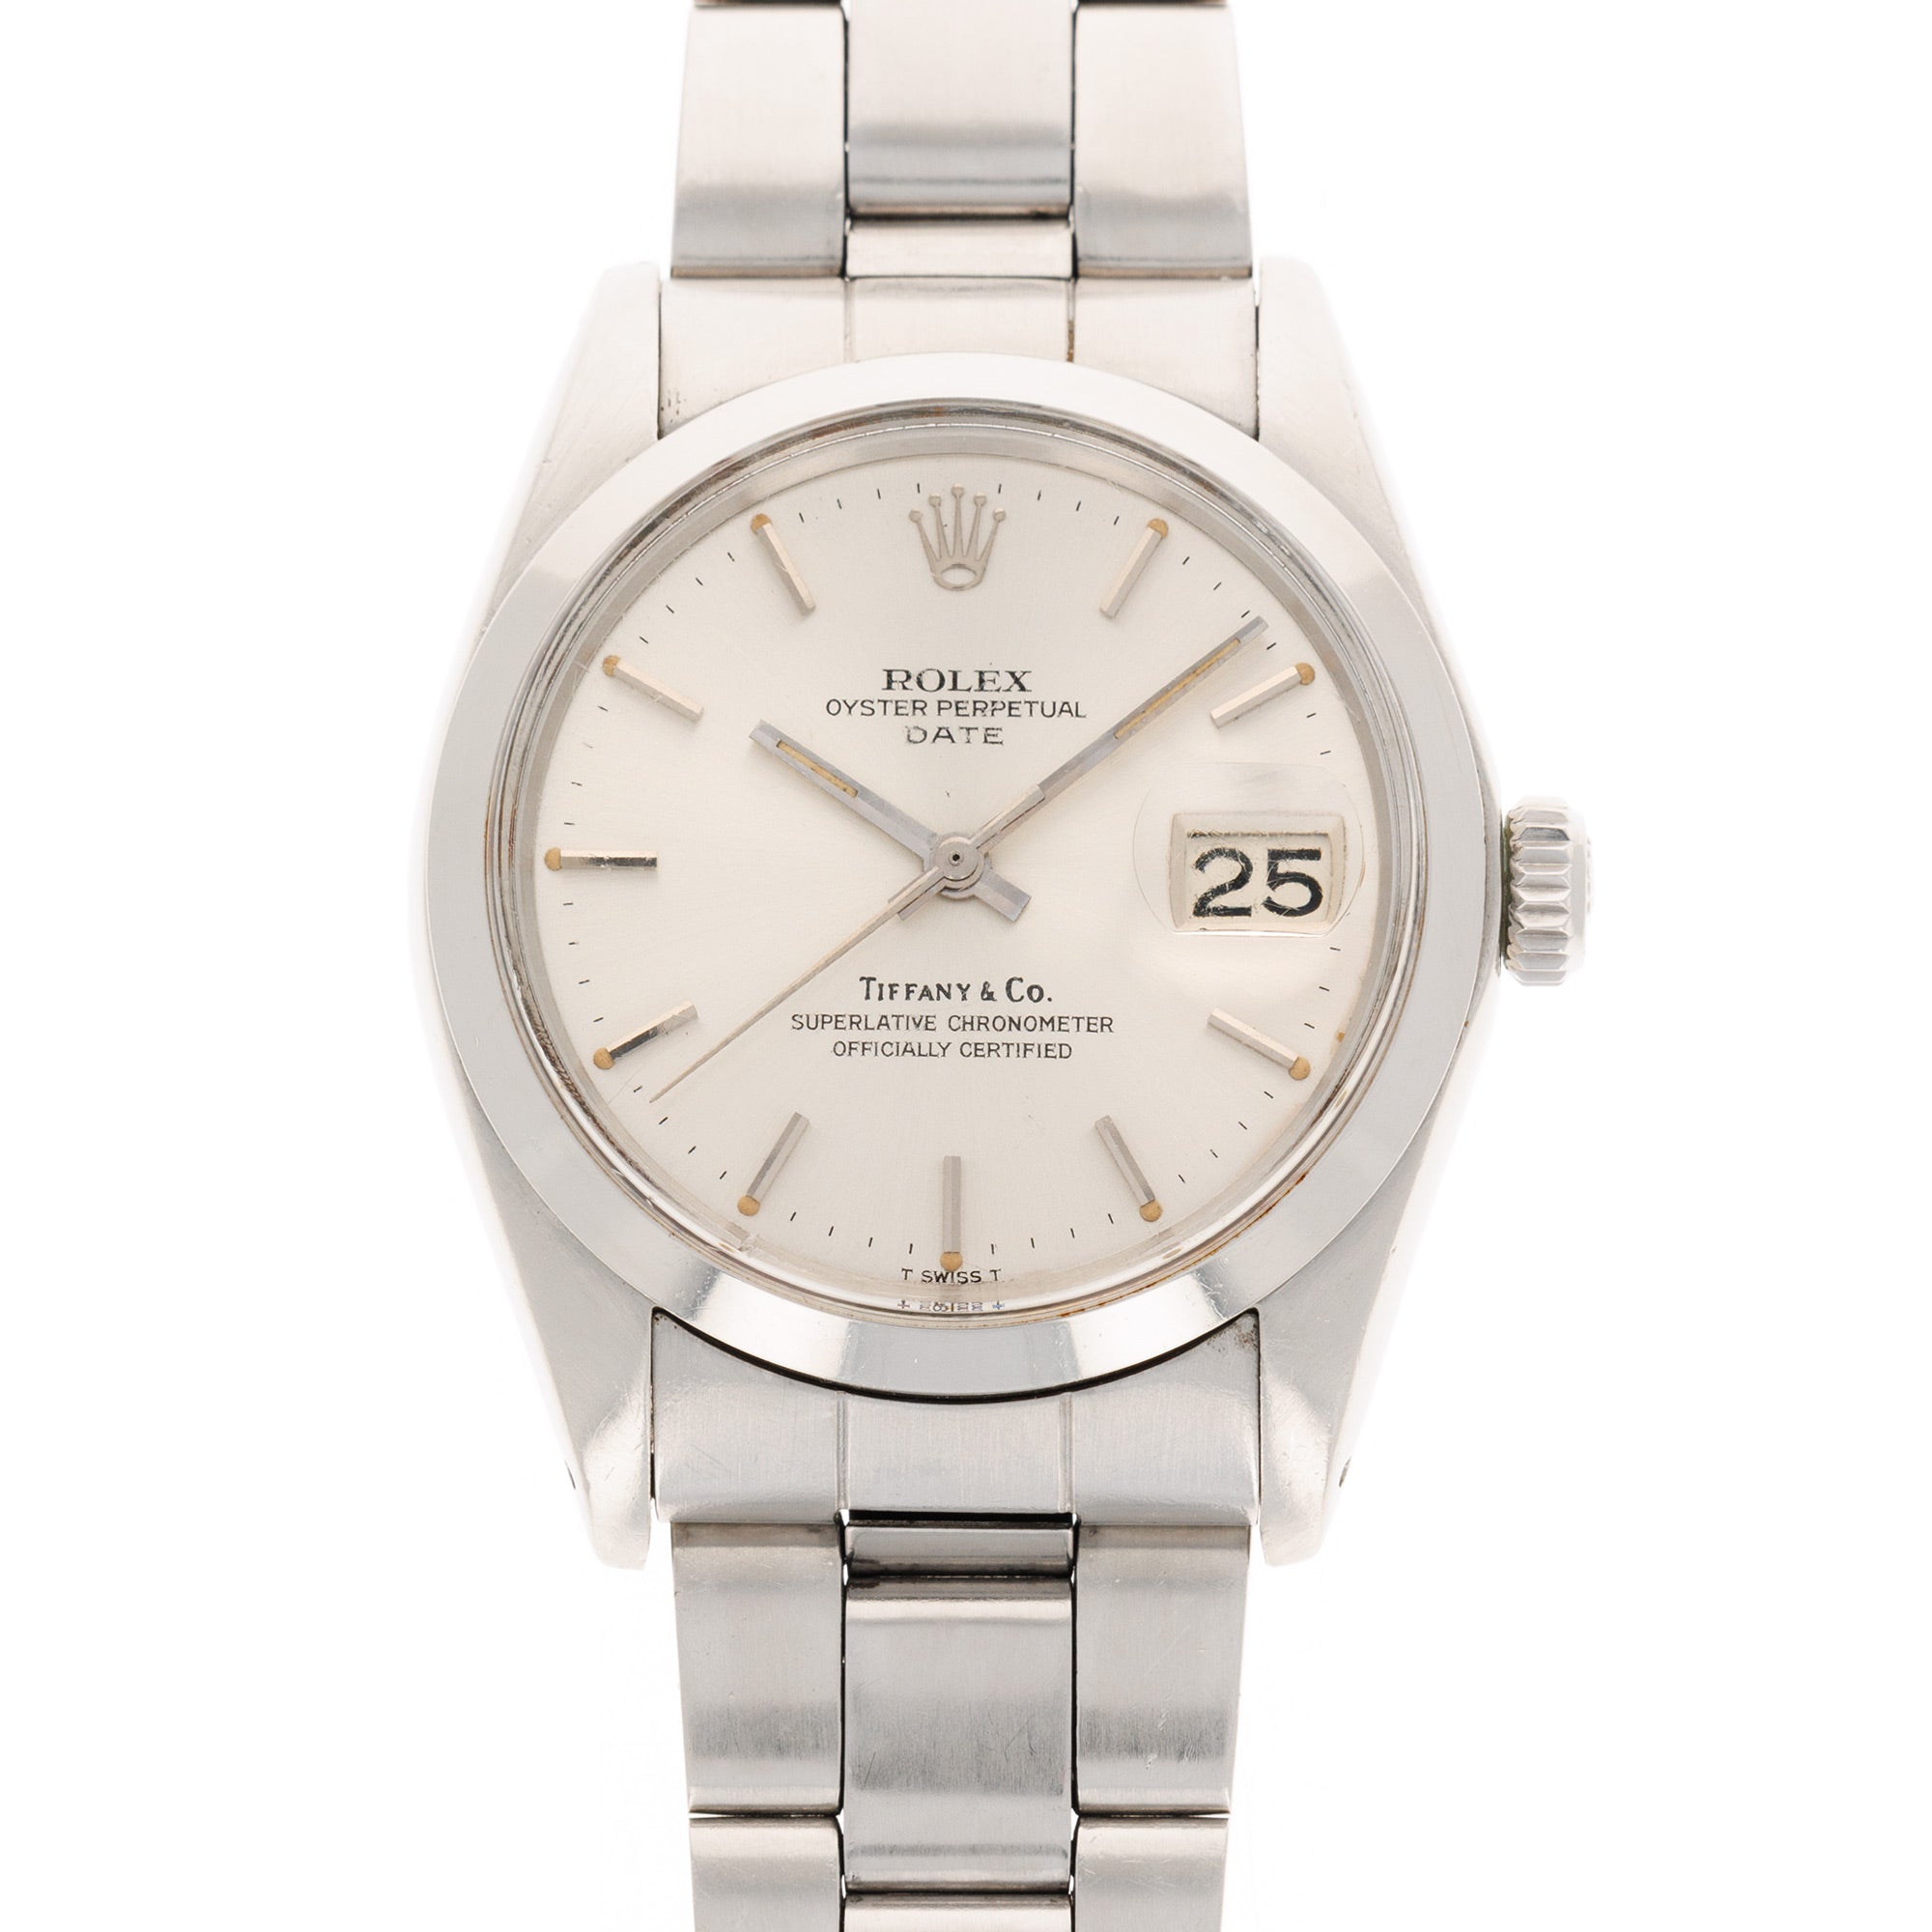 Rolex - Rolex Steel Date Ref. 1500 with Tiffany & Co. Signature - The Keystone Watches